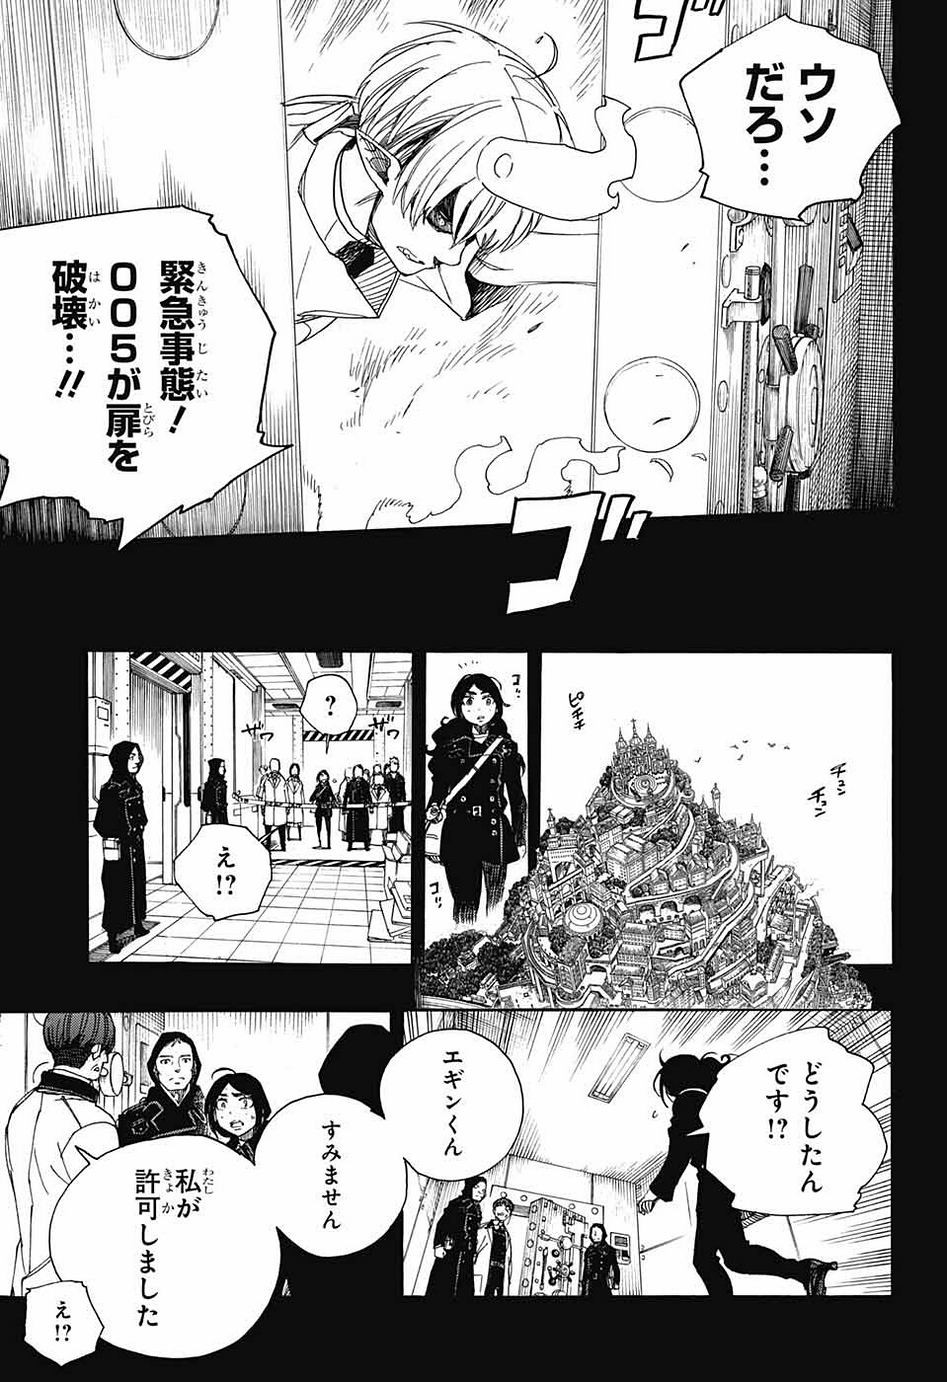 Ao no Exorcist - Chapter 105 - Page 32